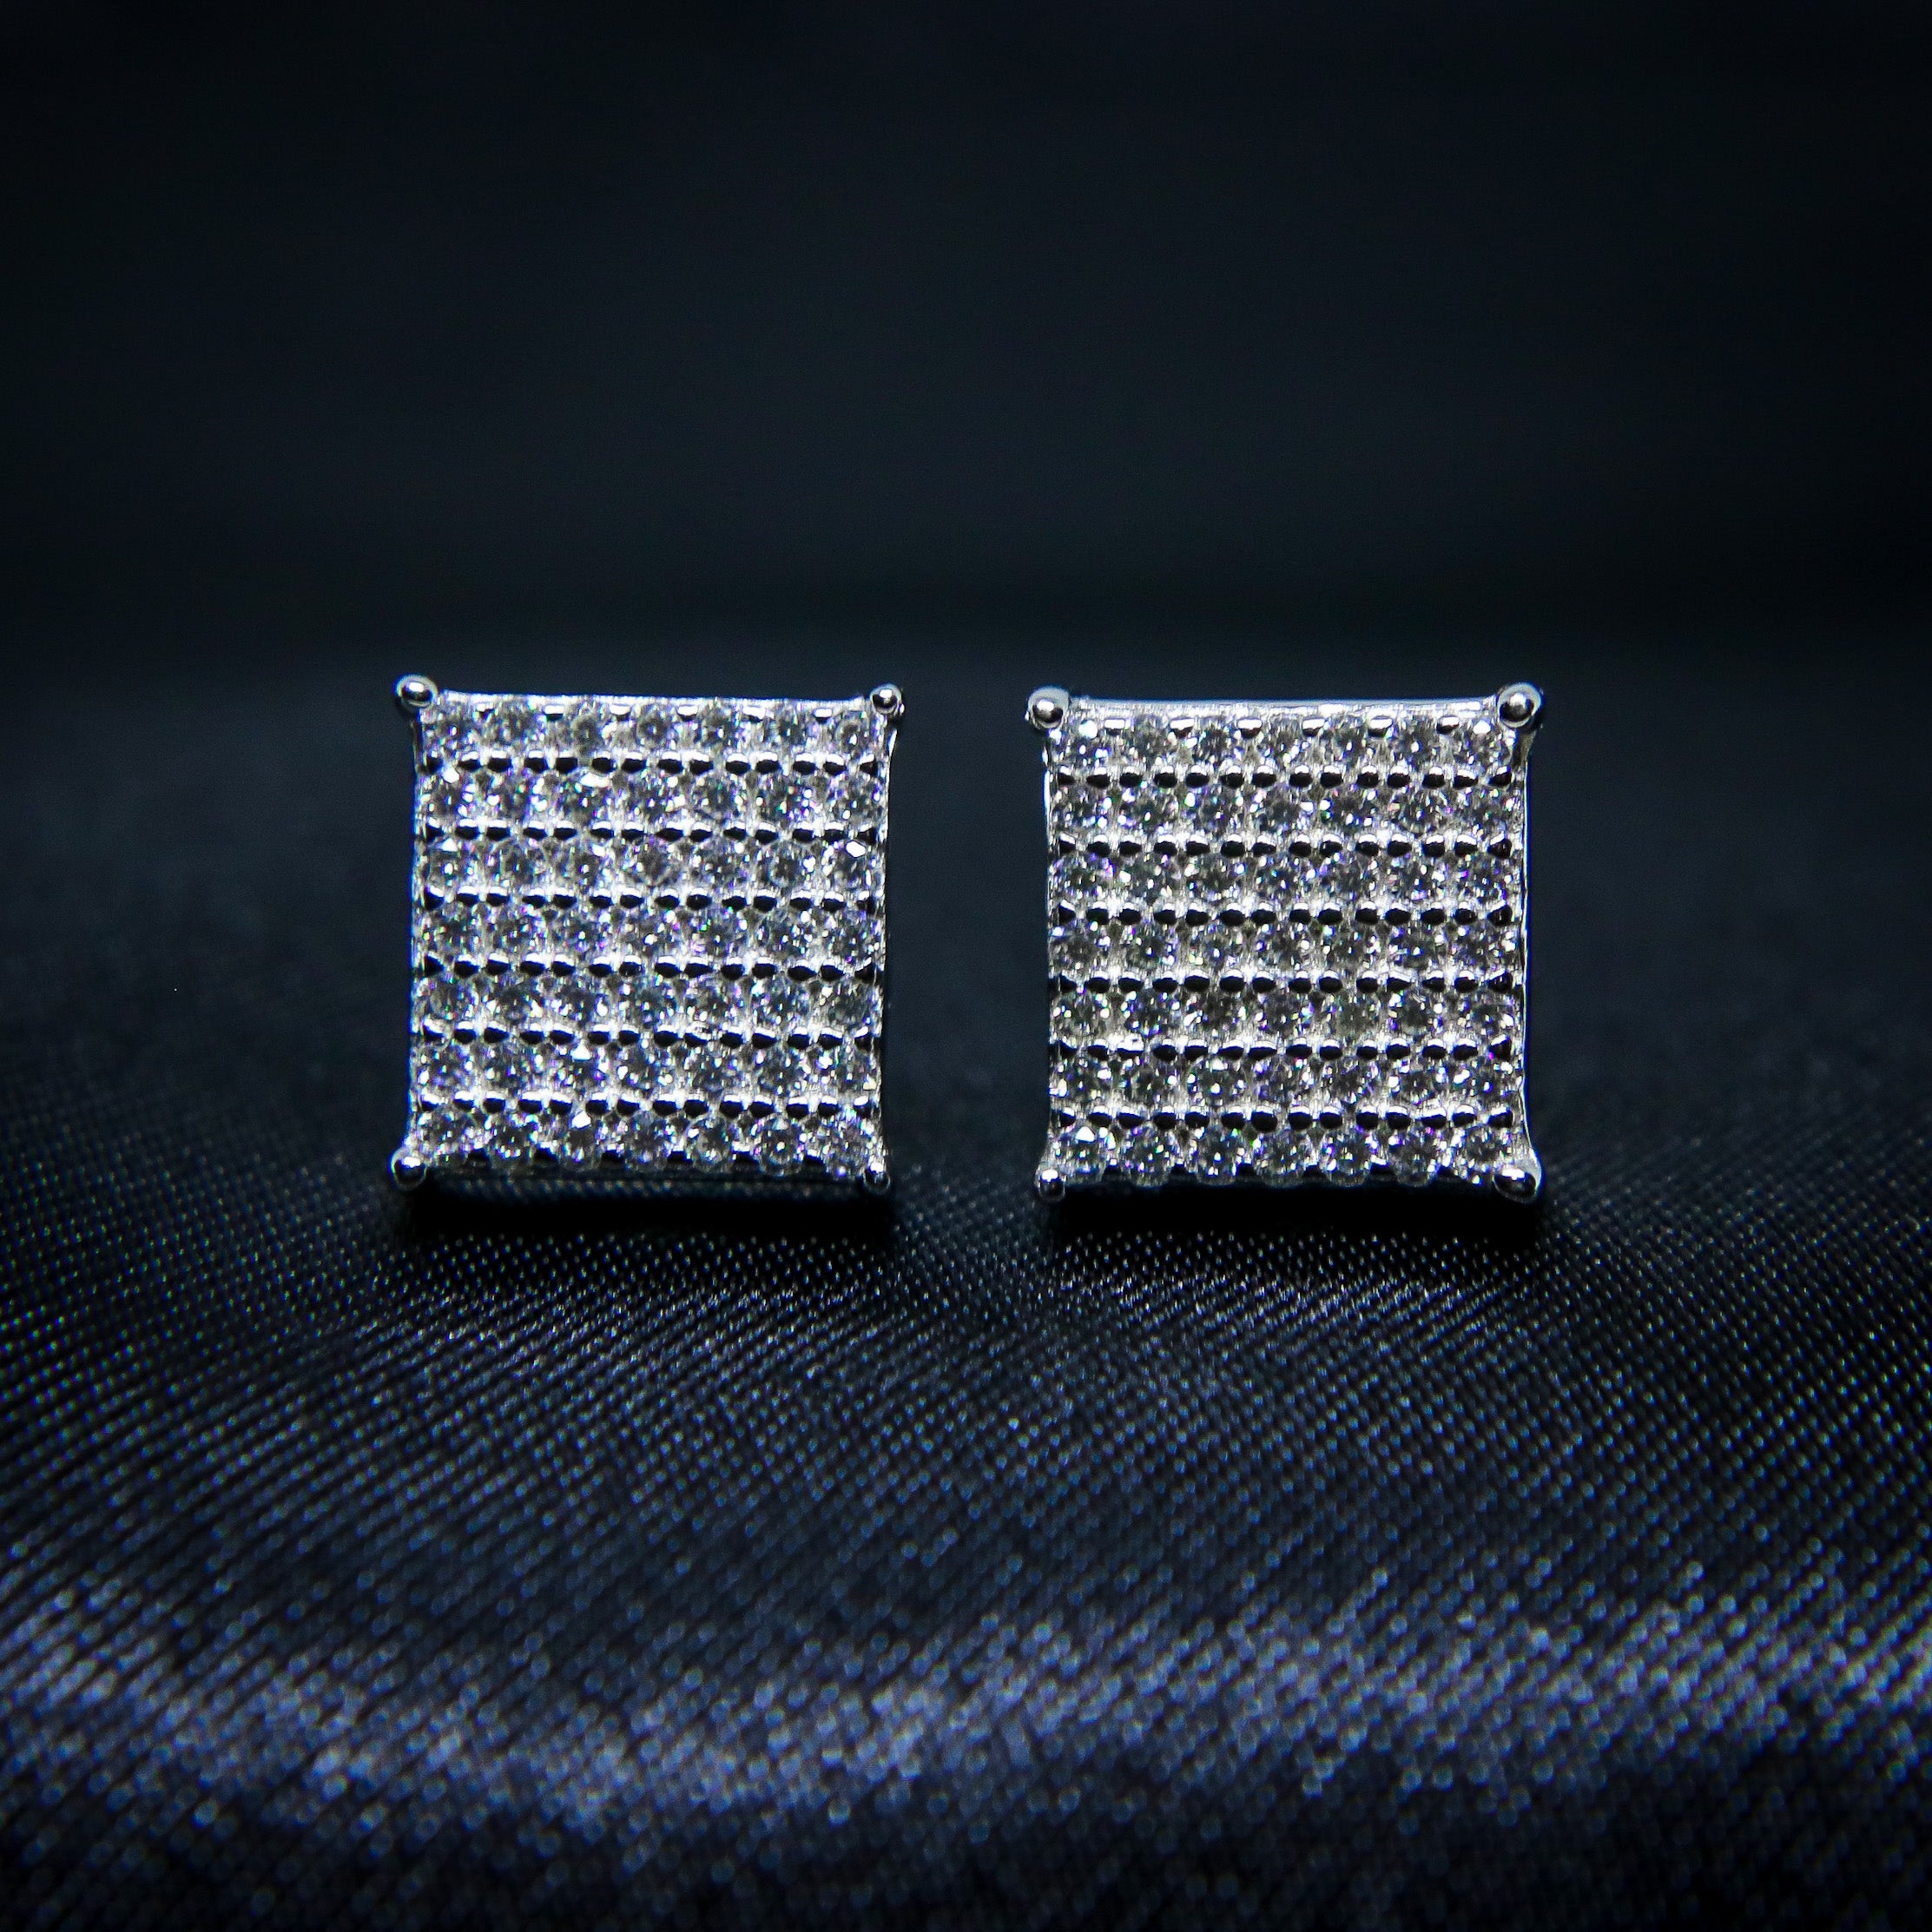 Buy Silver Square Stud Earrings for Men, Silver Studs for Men With  Solitaire 6 Mm Square Cubic Zirconia Stones, Pair of Square CZ Earrings  Online in India - Etsy